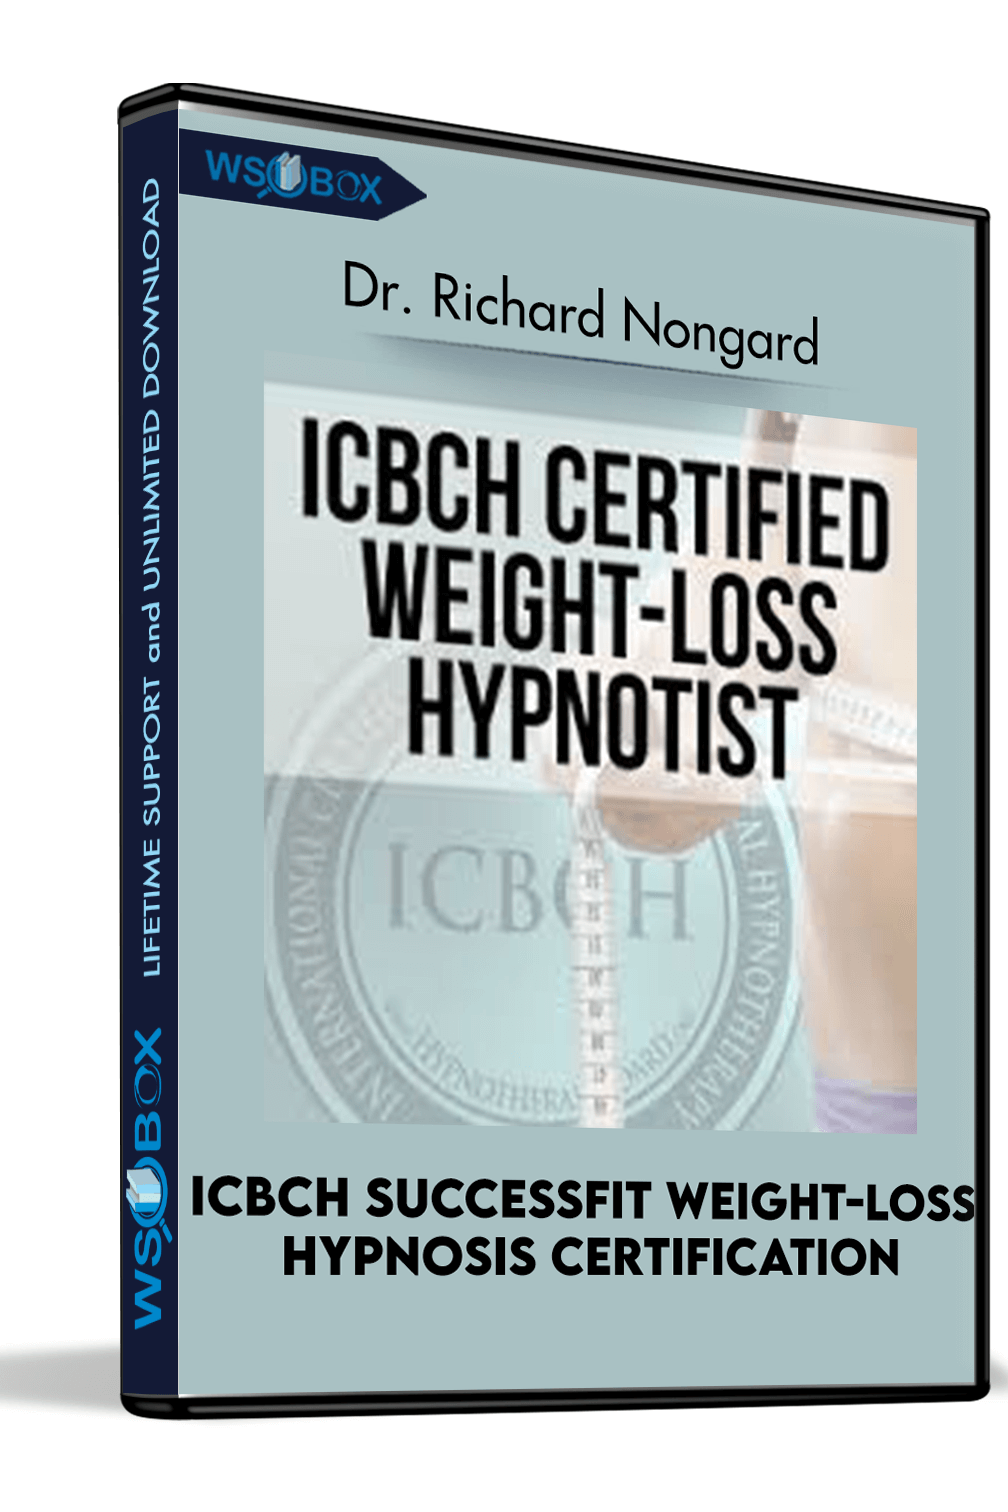 icbch-successfit-weight-loss-hypnosis-certification-dr-richard-nongard